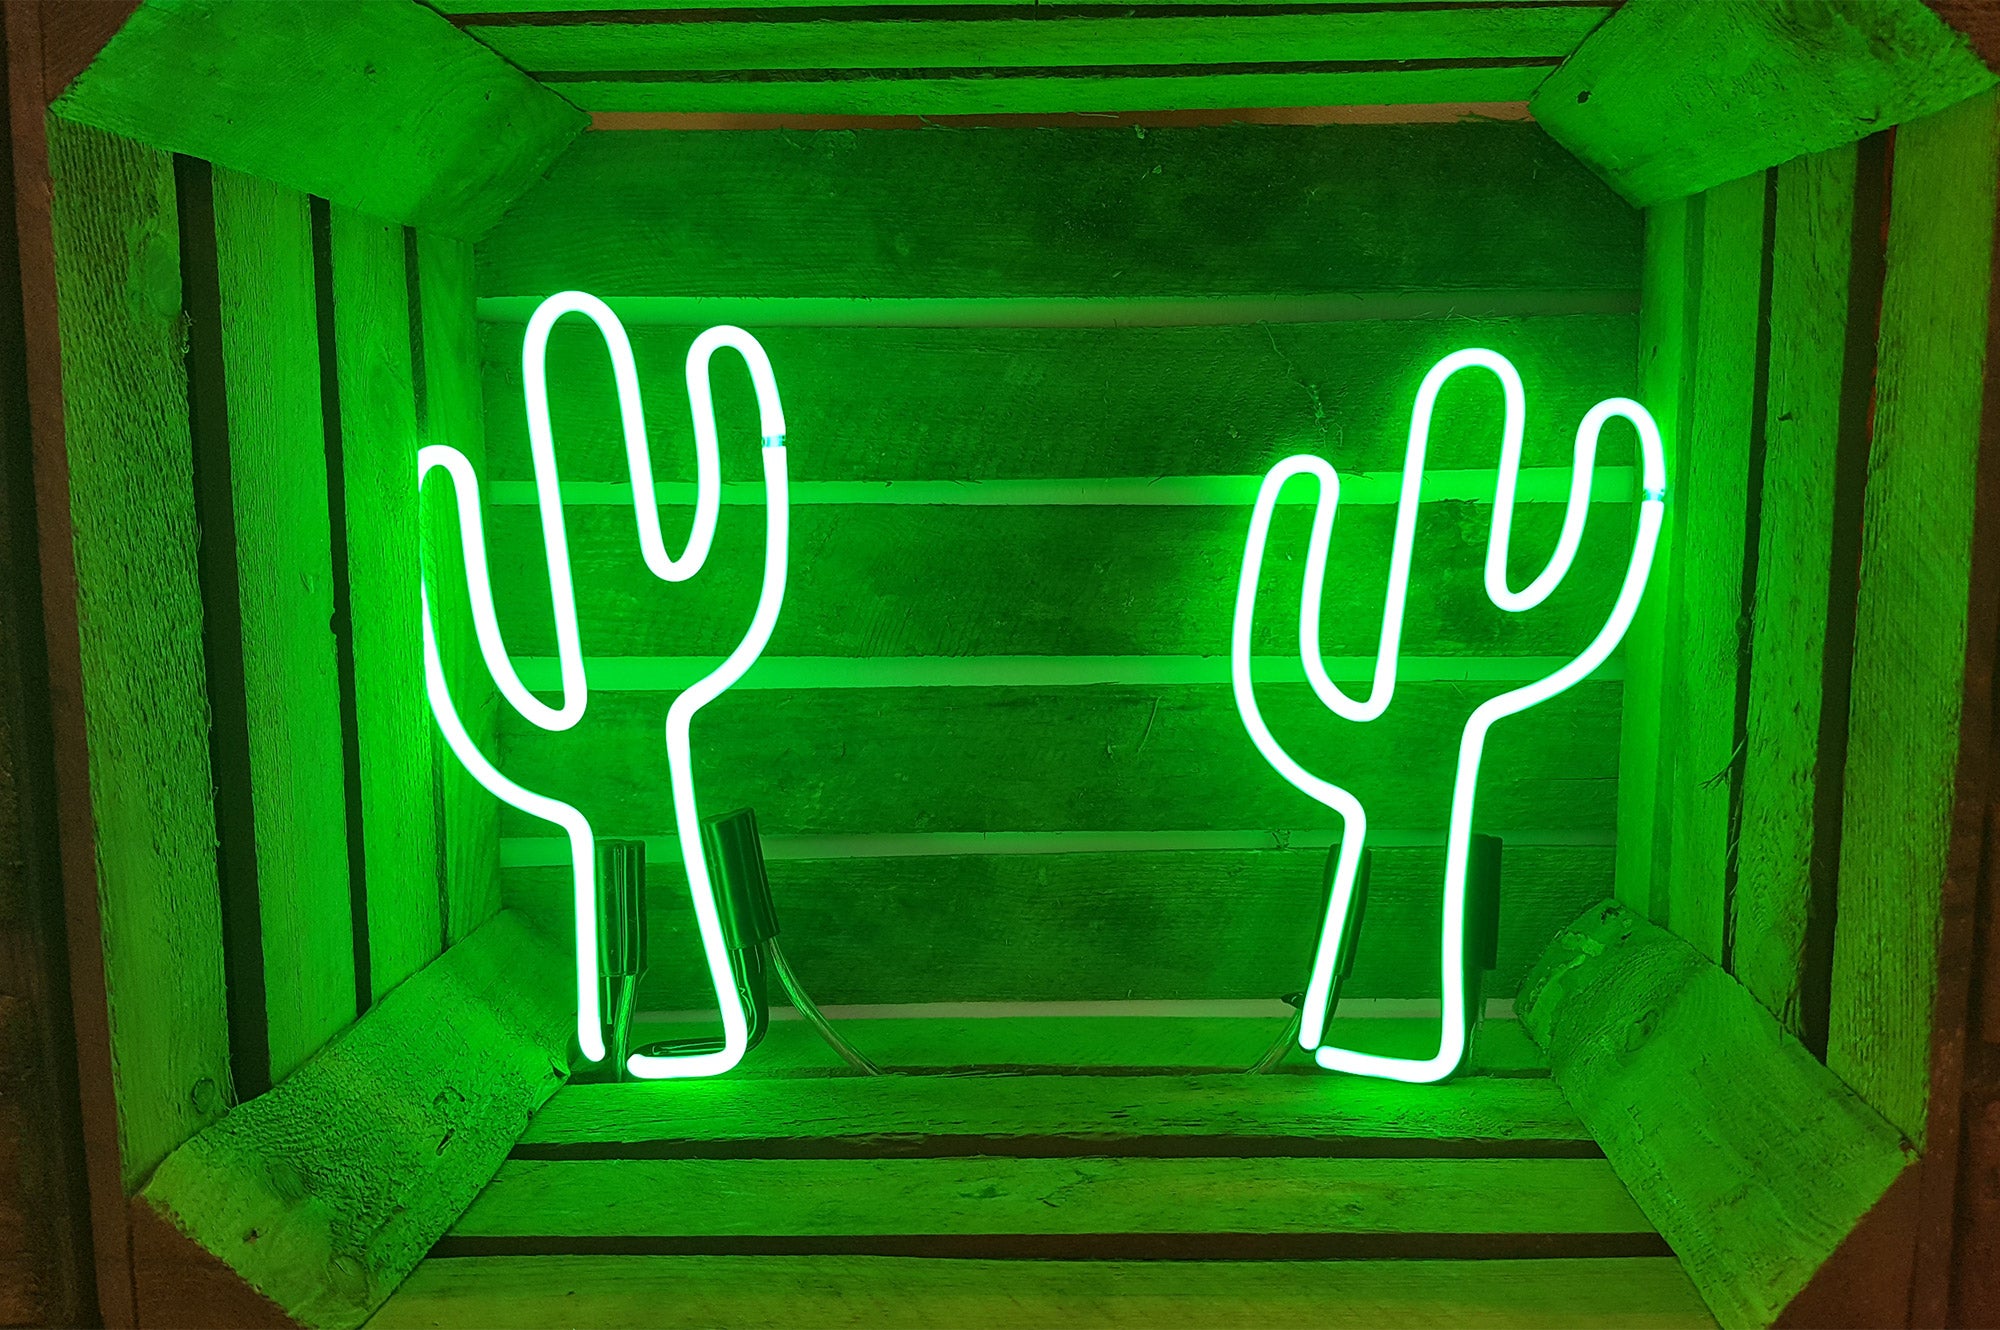 Cactus' green neon light. Real glass neon fitted inside wooden crate.